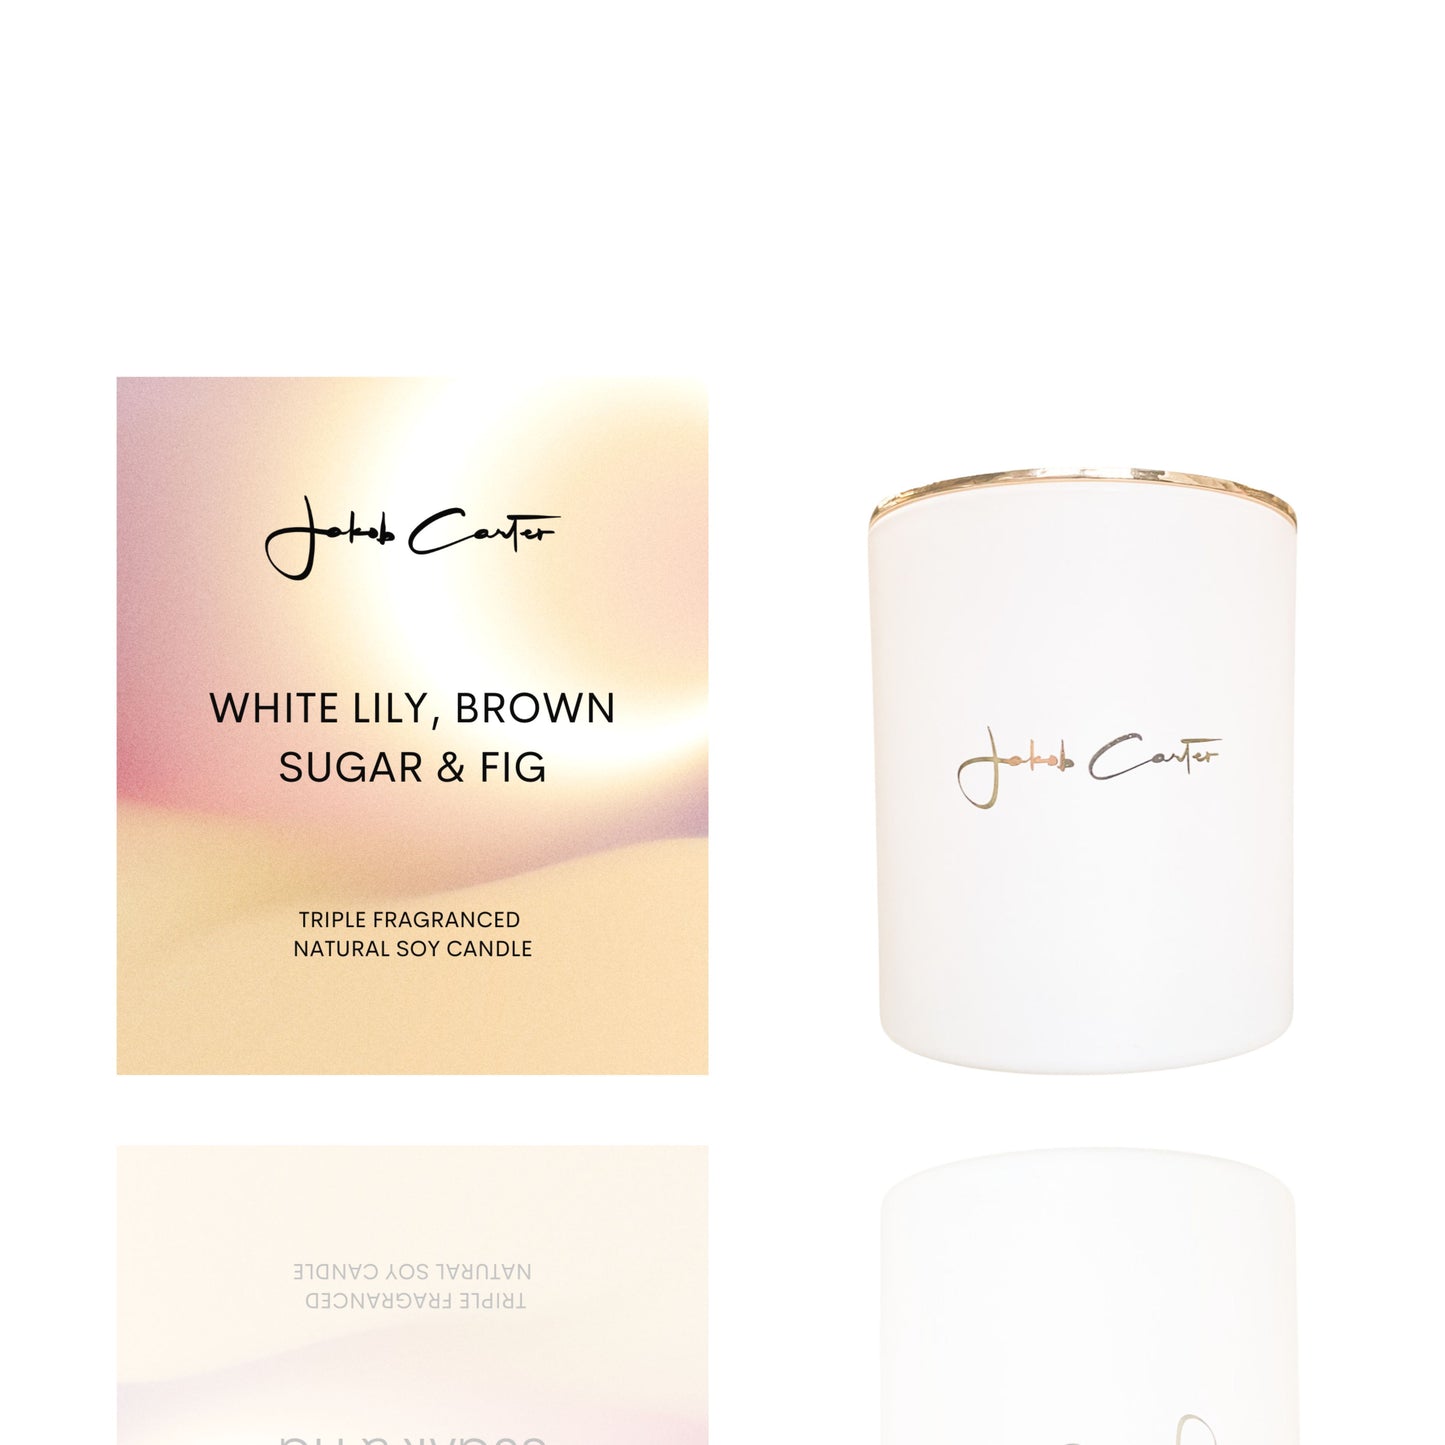 Jakob Carter Candles in White Lily, Brown Sugar & Fig